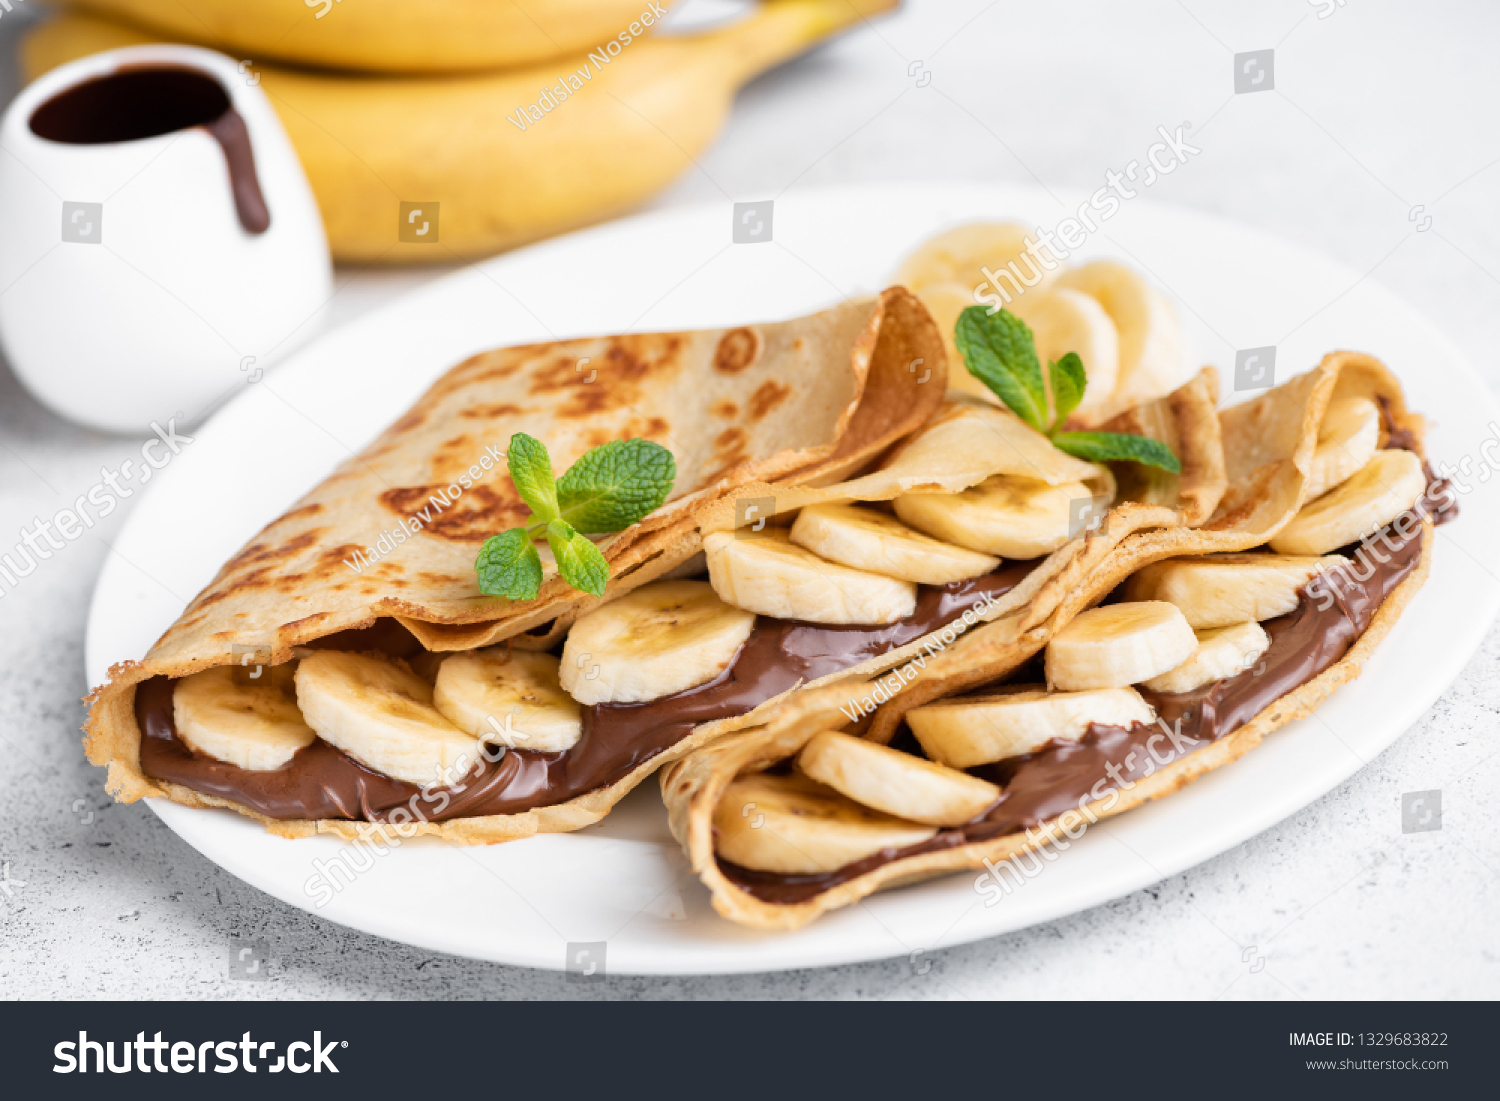 Crepes stuffed with chocolate spread and banana on white plate. Thin pancakes, blini. Sweet dessert. #1329683822